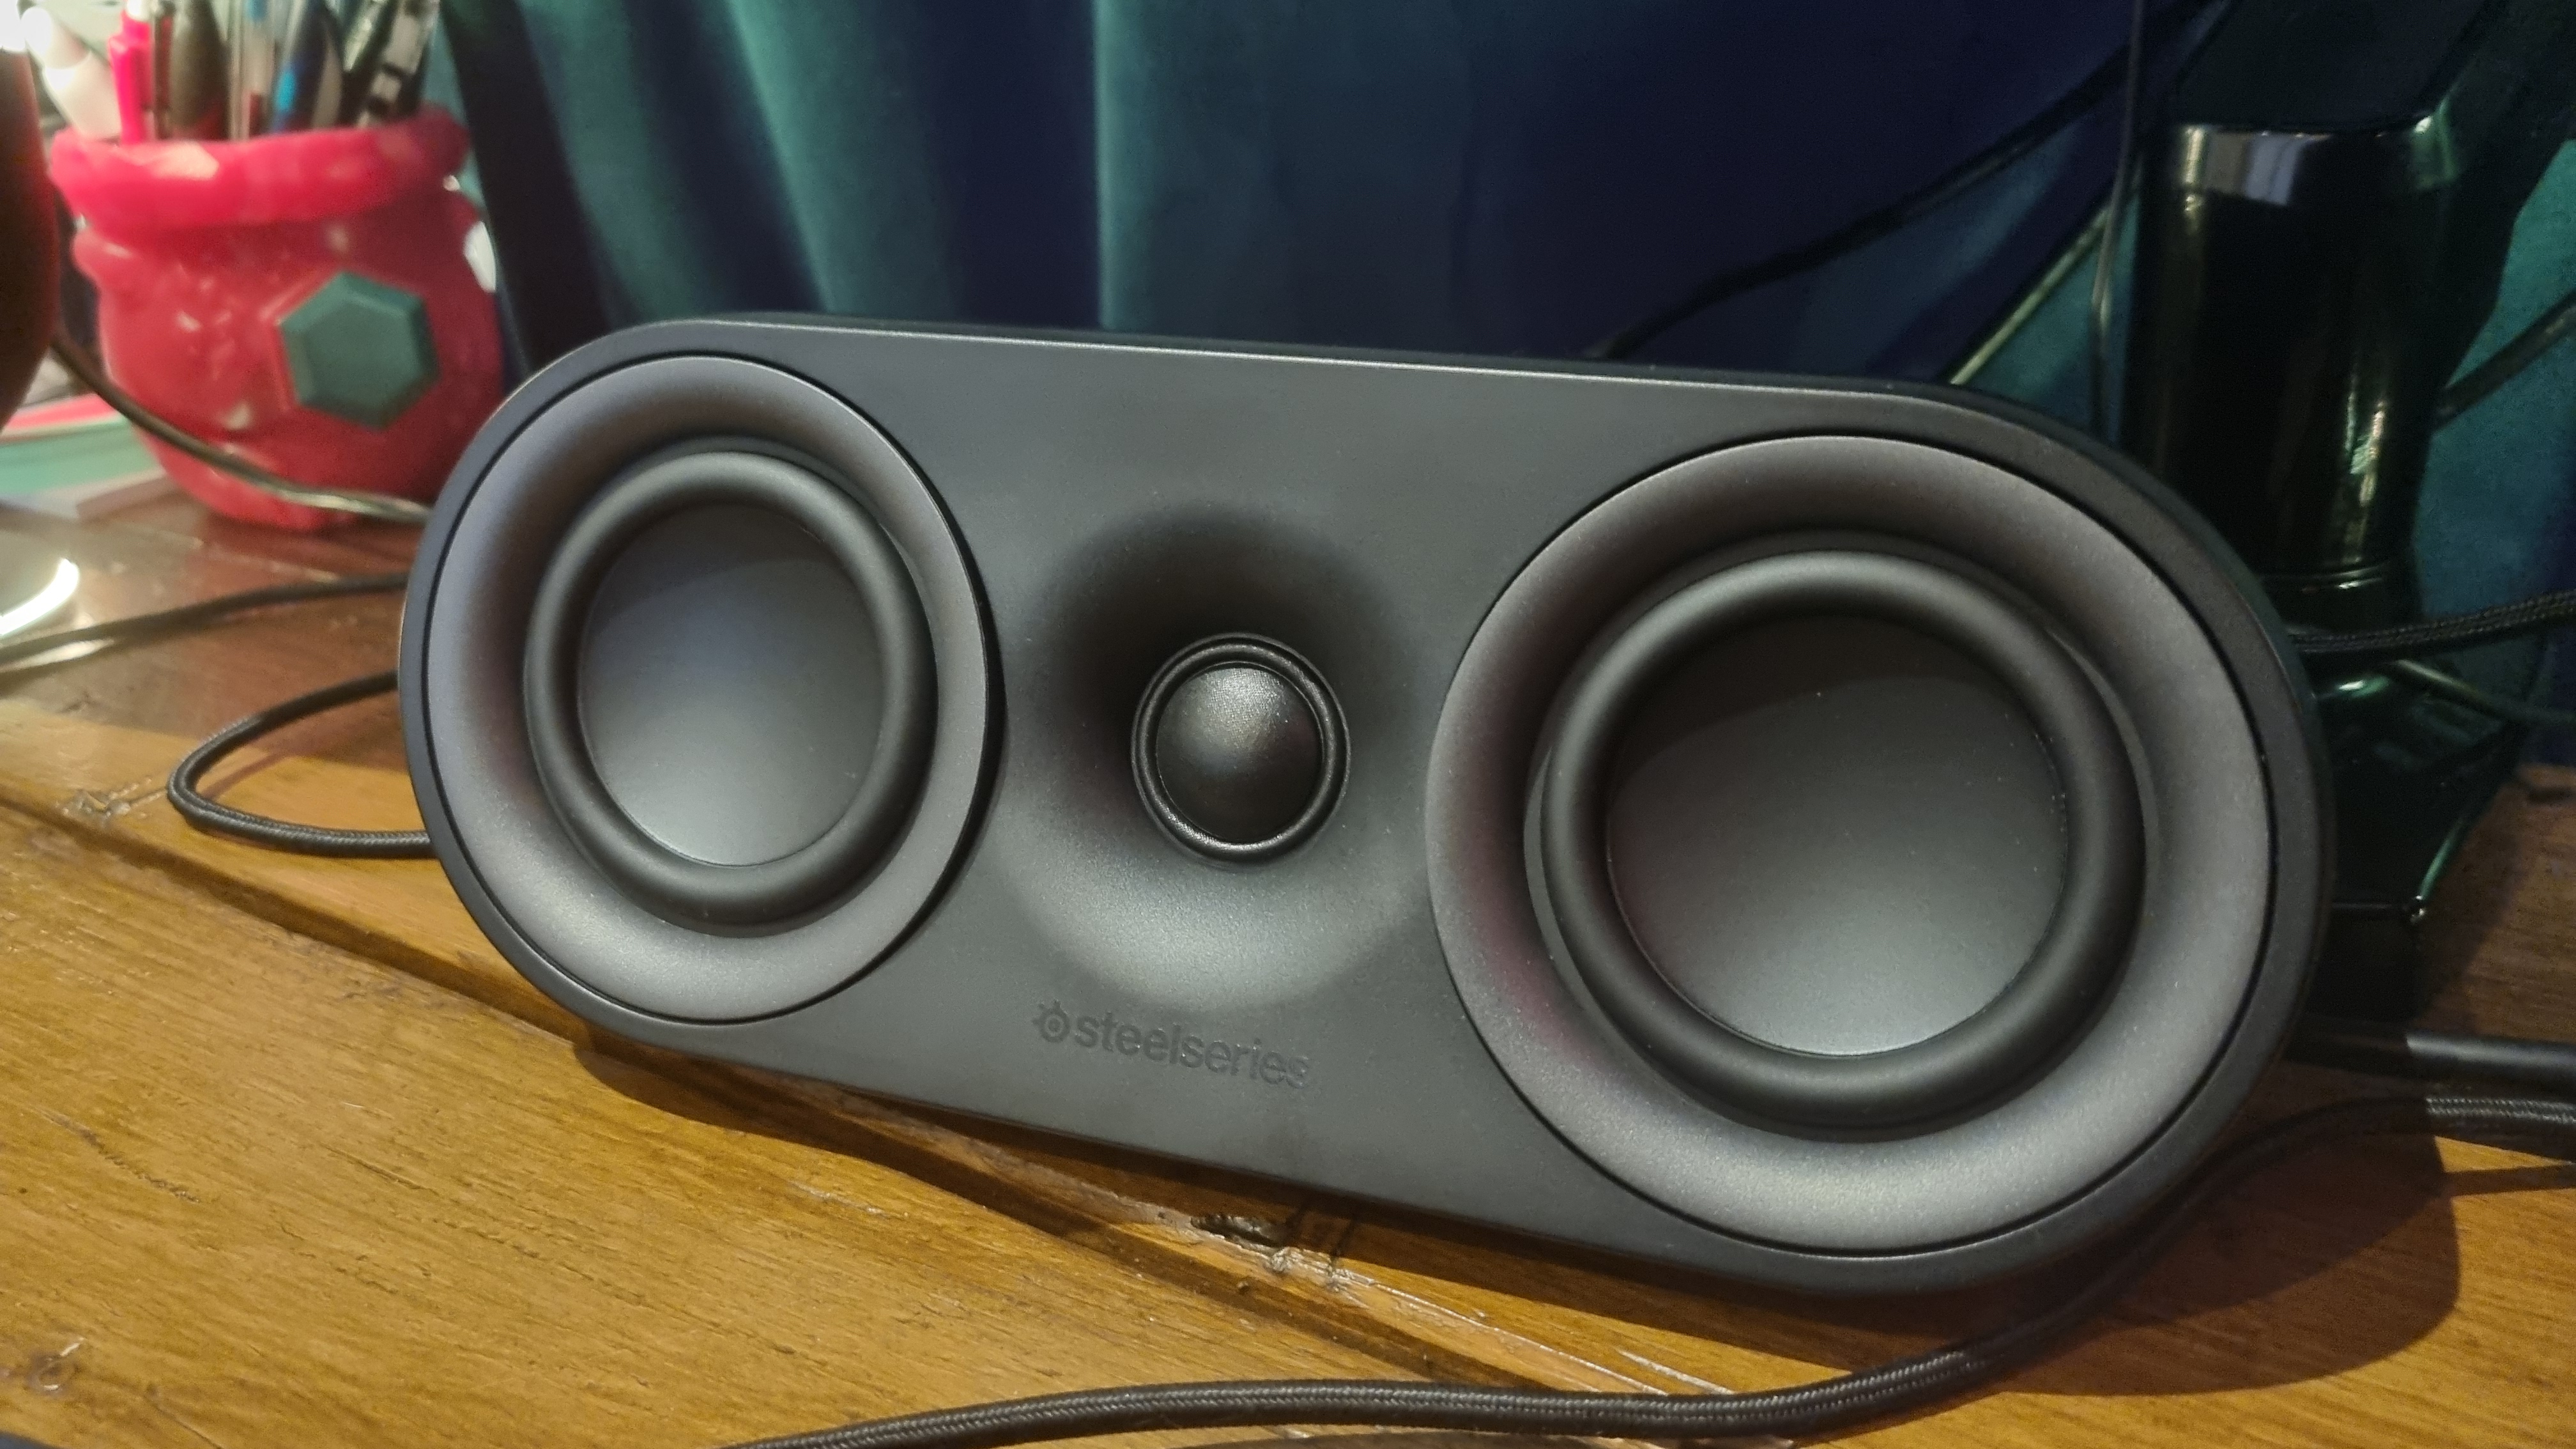 The central speaker of the SteelSeries Arena 9, on a wooden desk